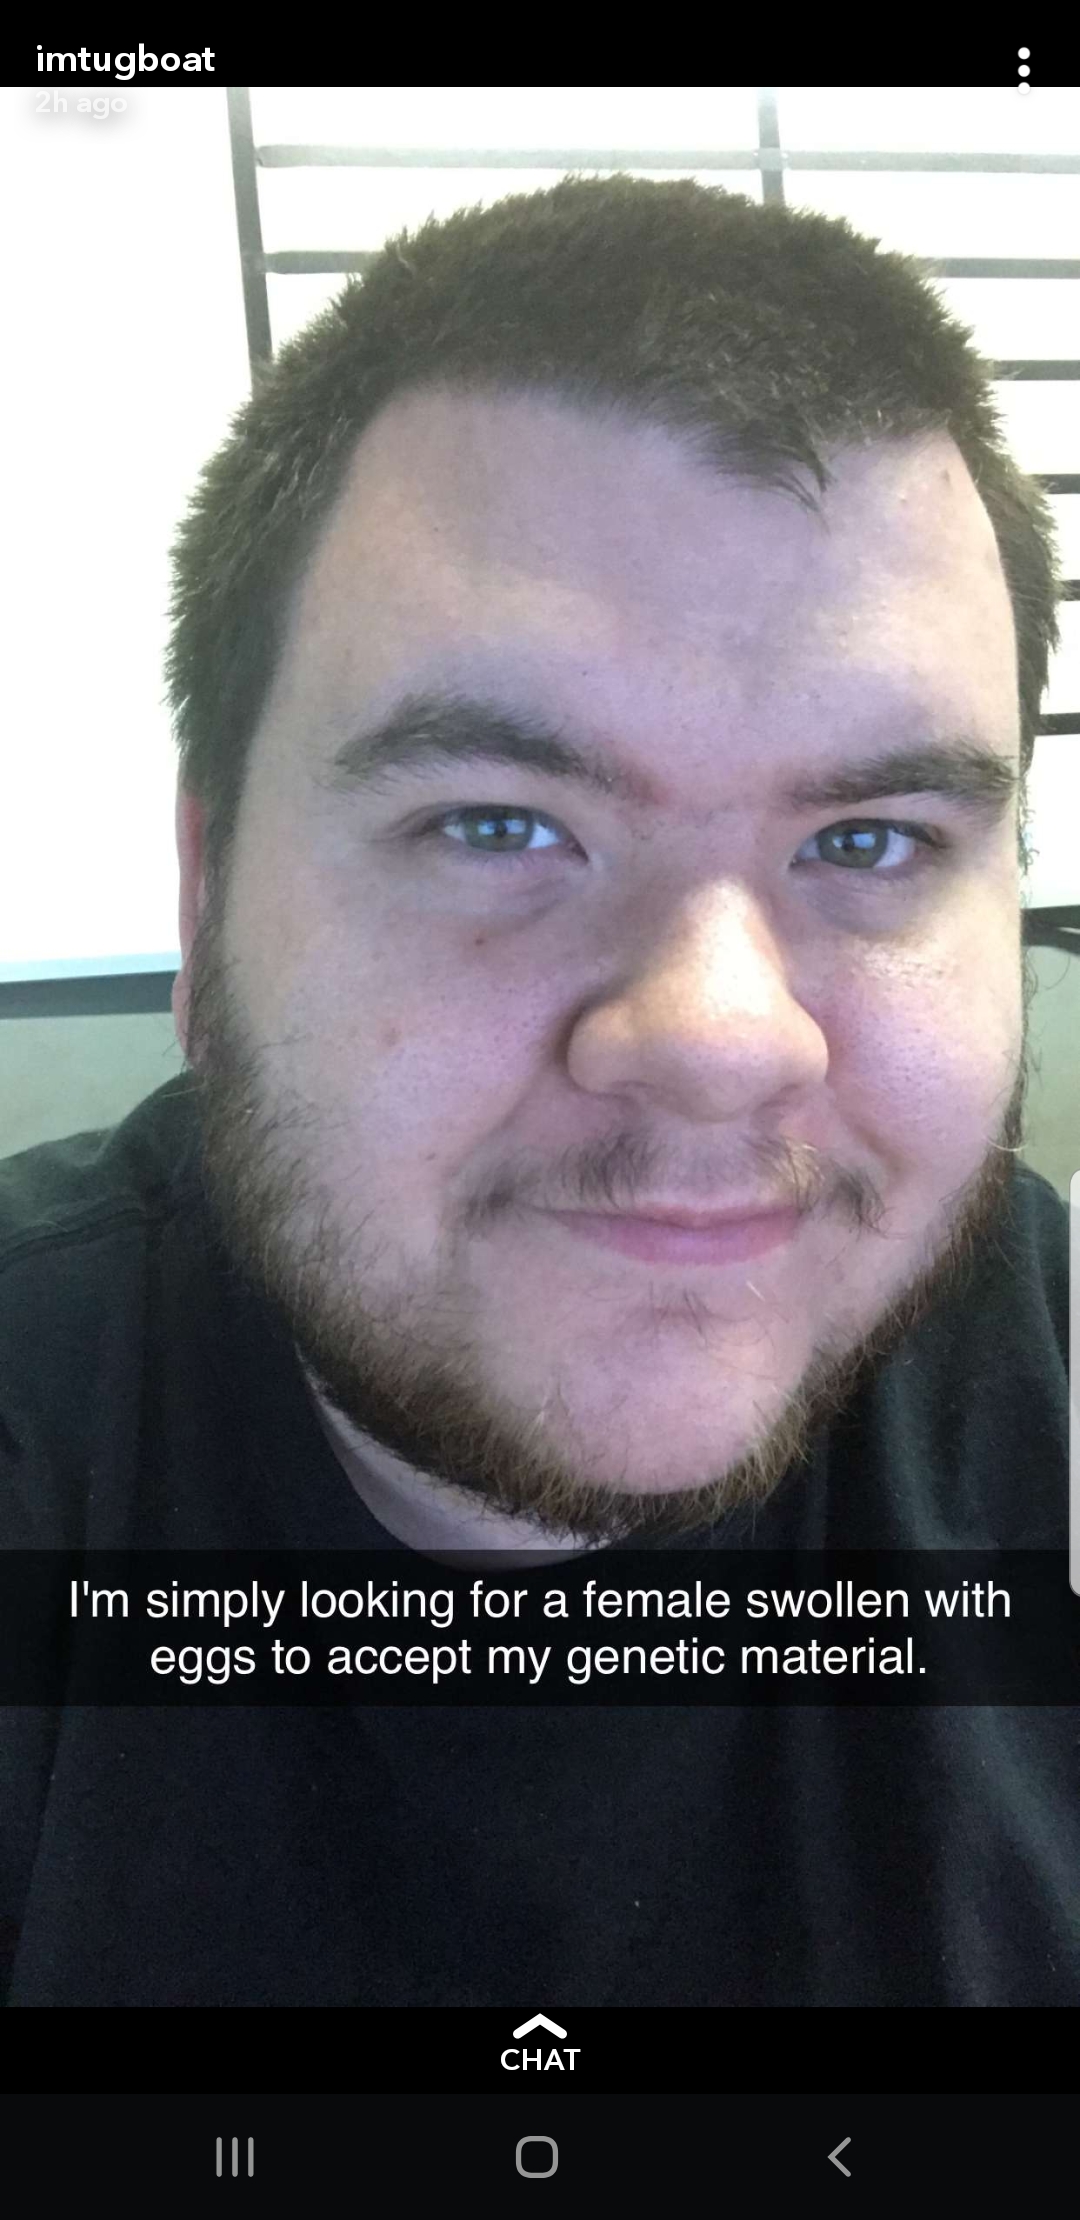 imtugboat I'm simply looking for a female swollen with eggs to accept my genetic material.